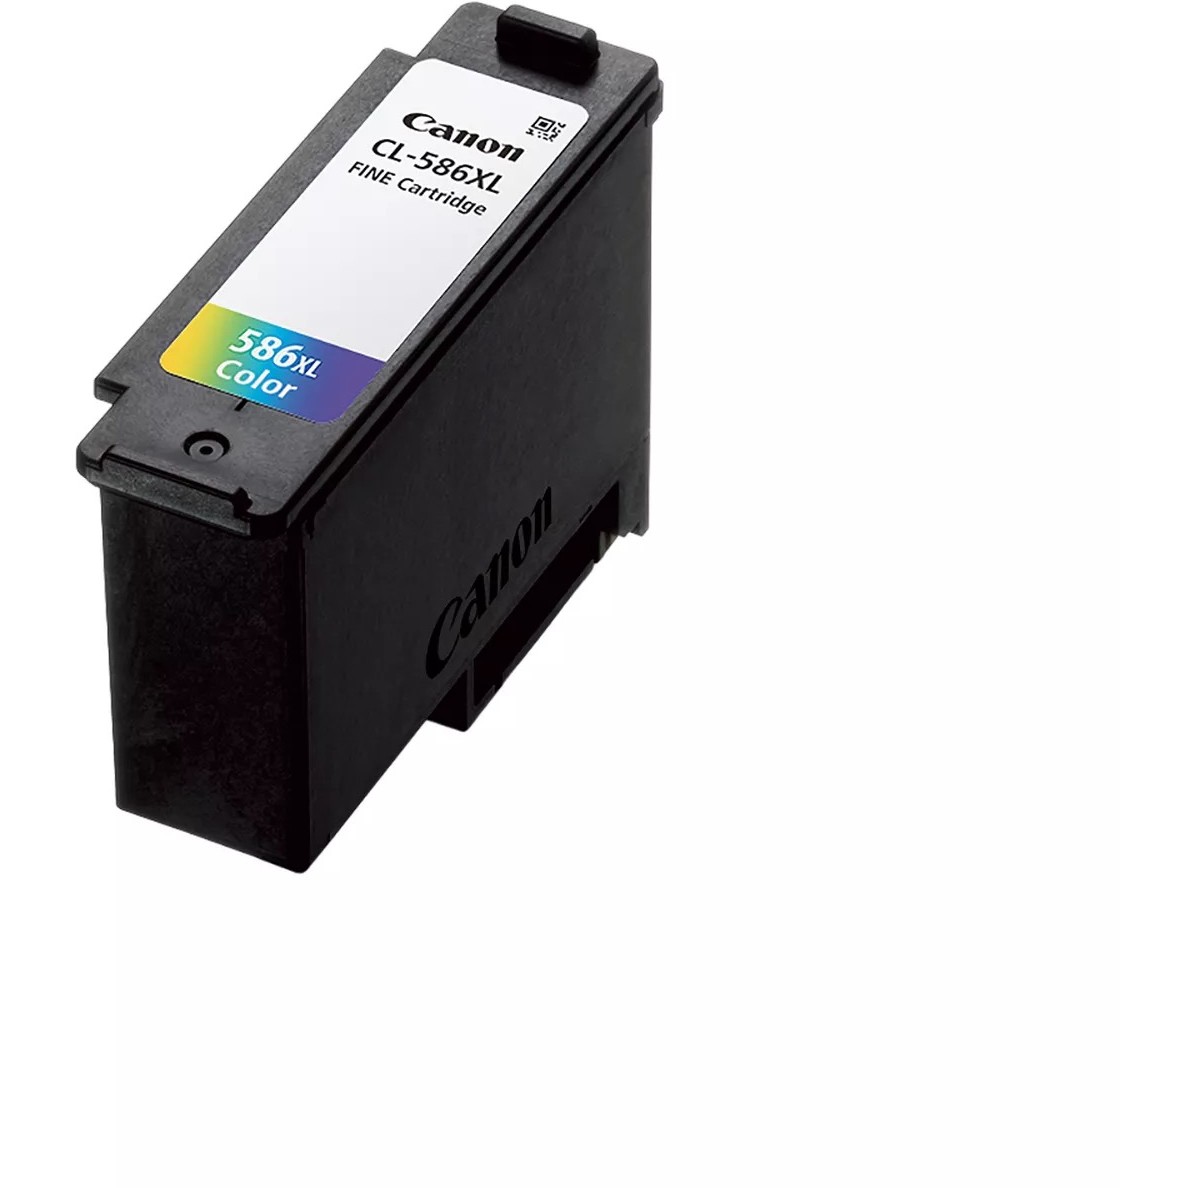 Canon CL-586XL ink cartridge